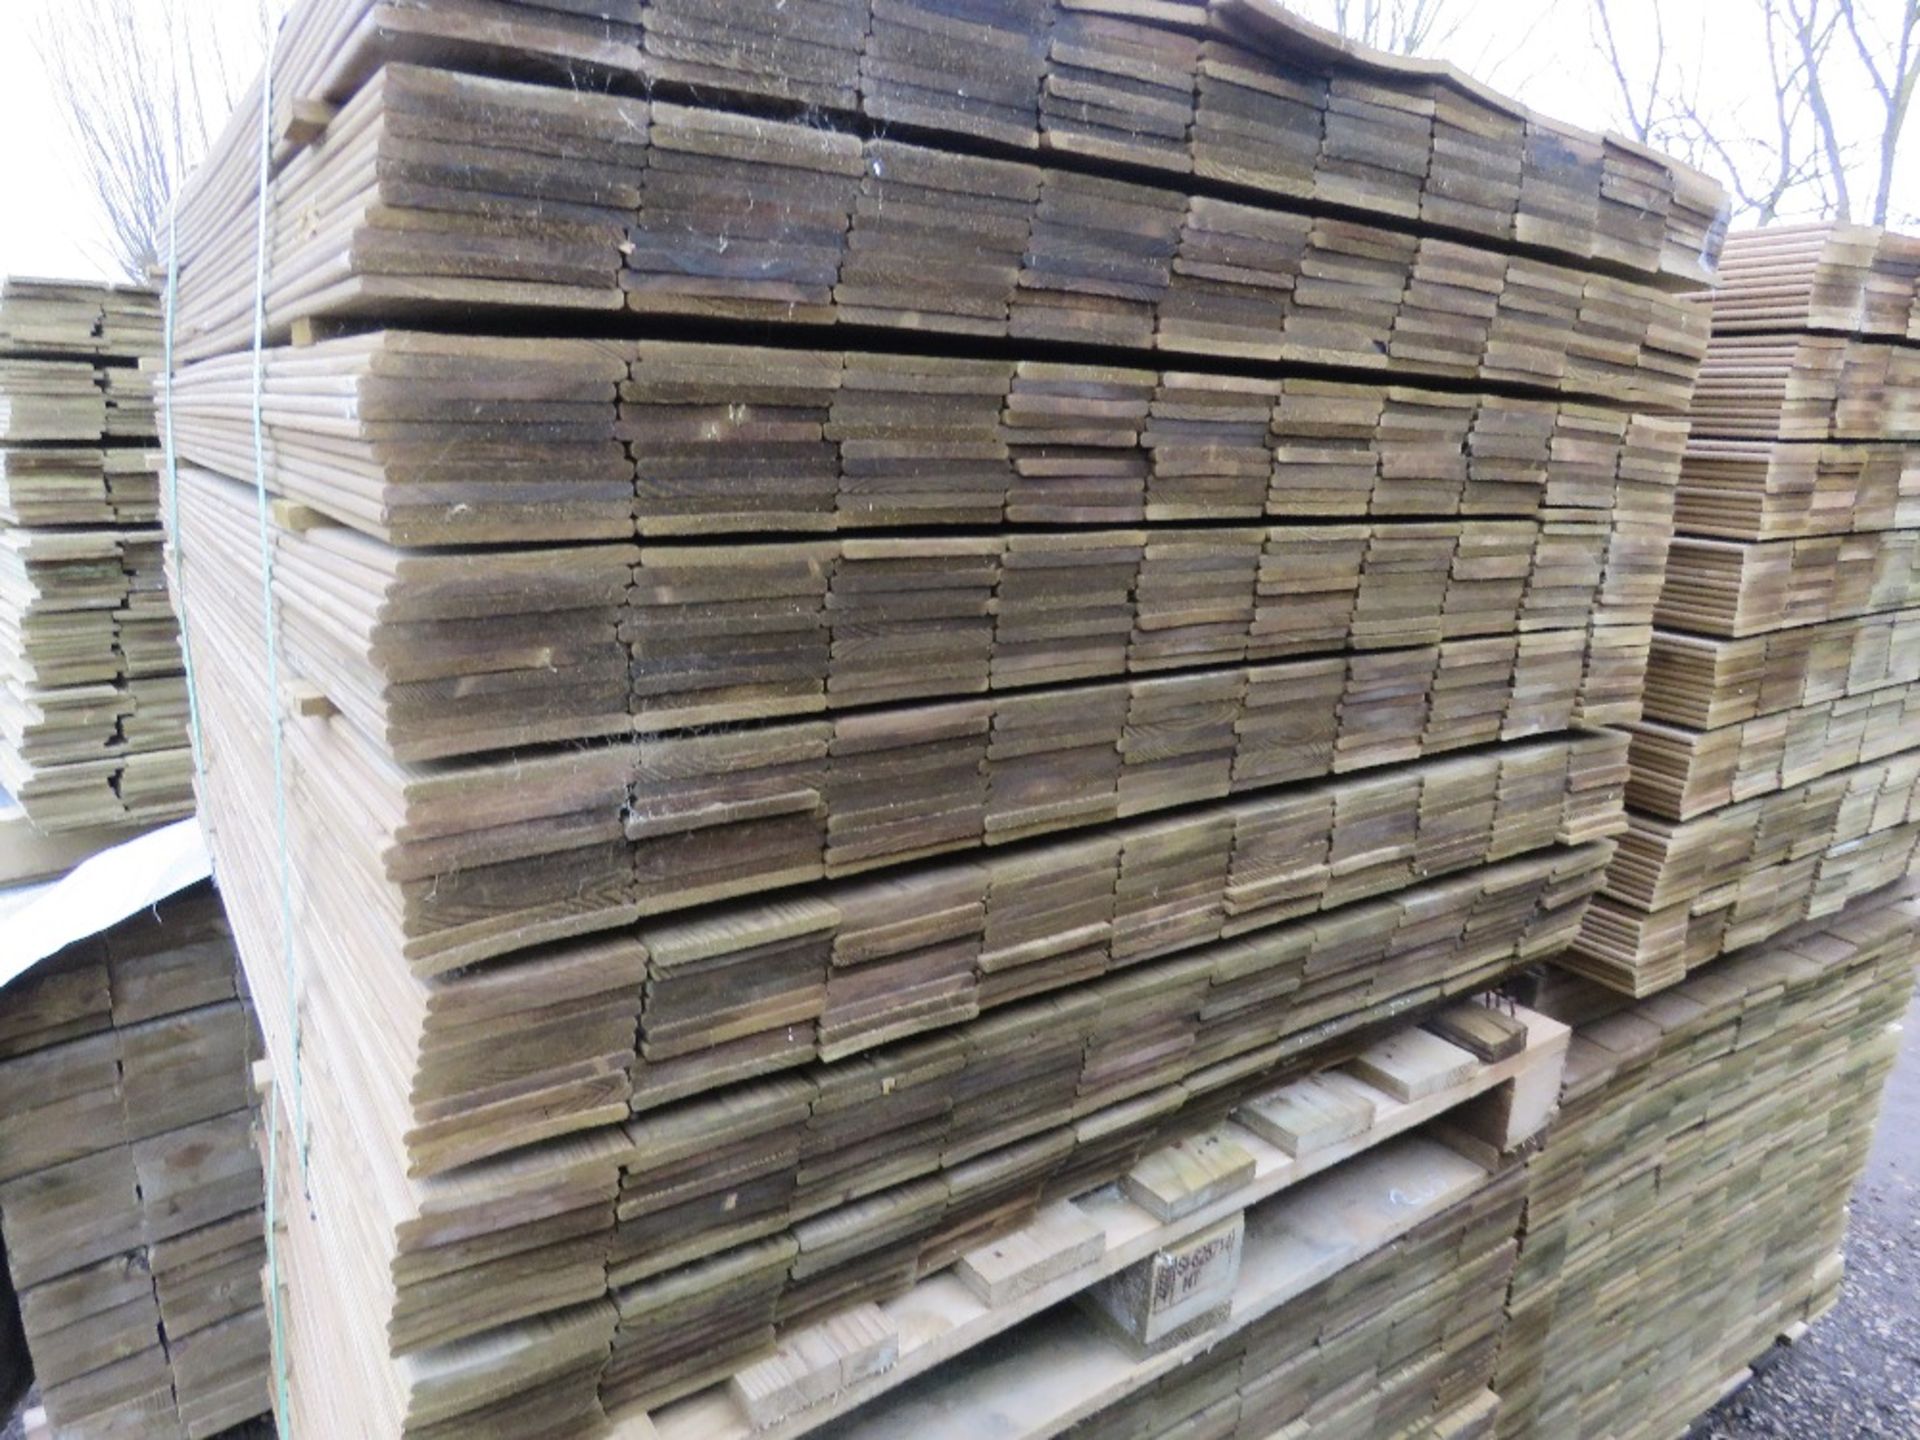 2 X PALLETS OF TREATED HIT AND MISS FENCE CLADDING BOARDS 1.04M LENGTH X 100MM WIDTH APPROX. - Image 2 of 4